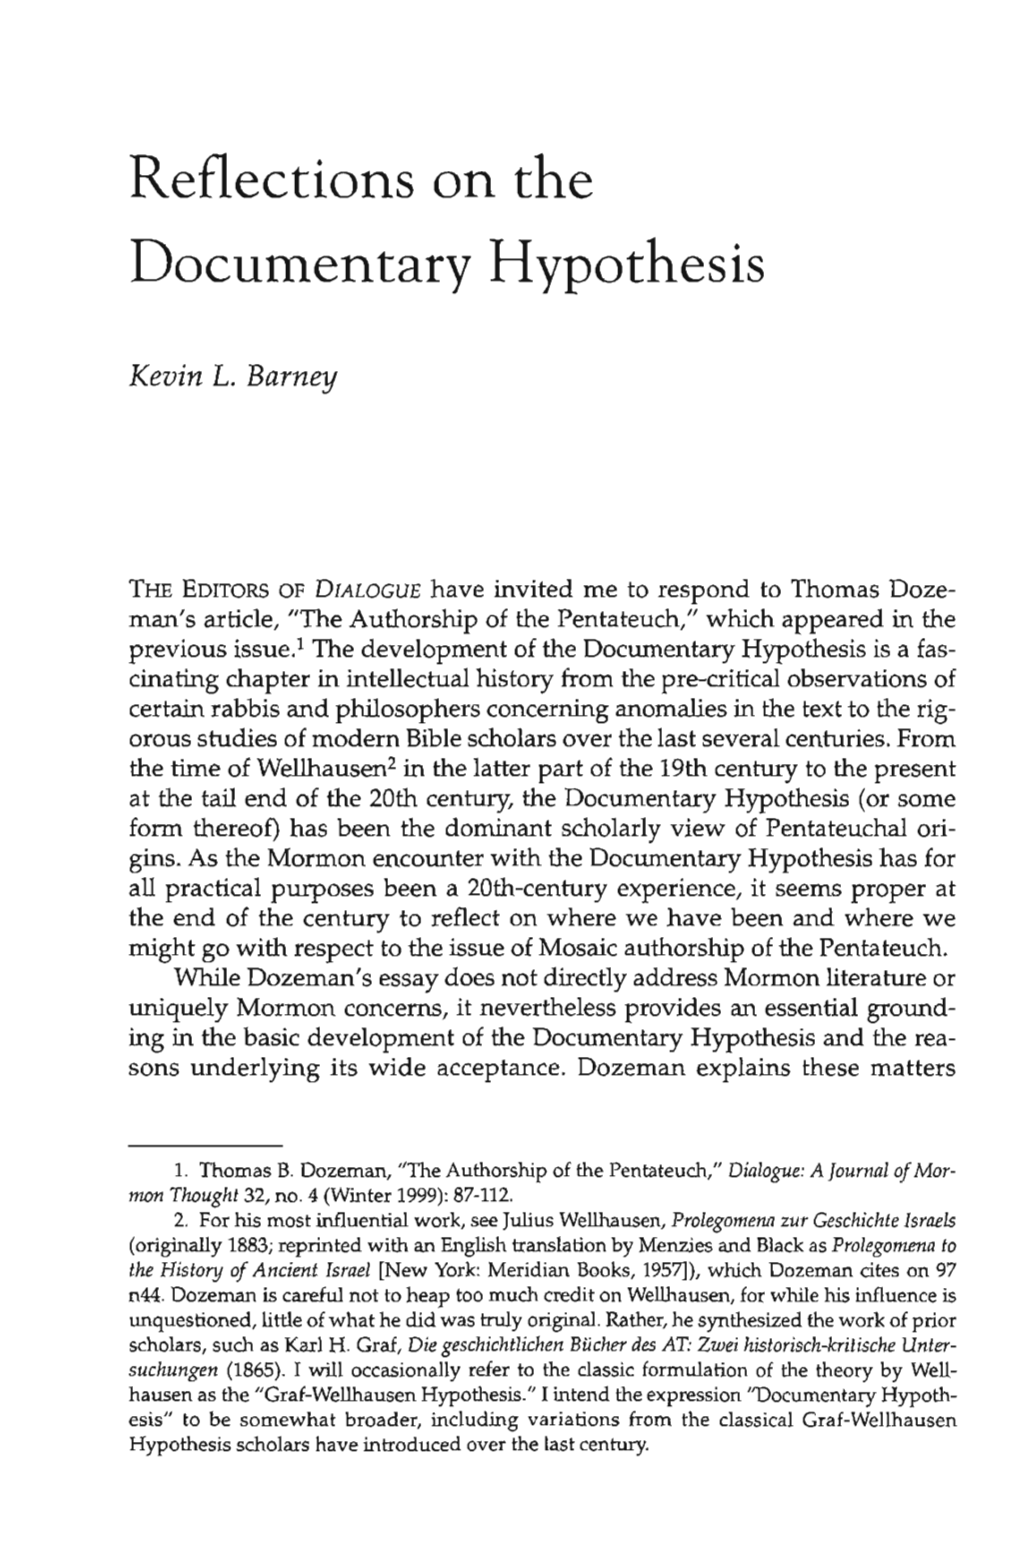 Reflections on the Documentary Hypothesis